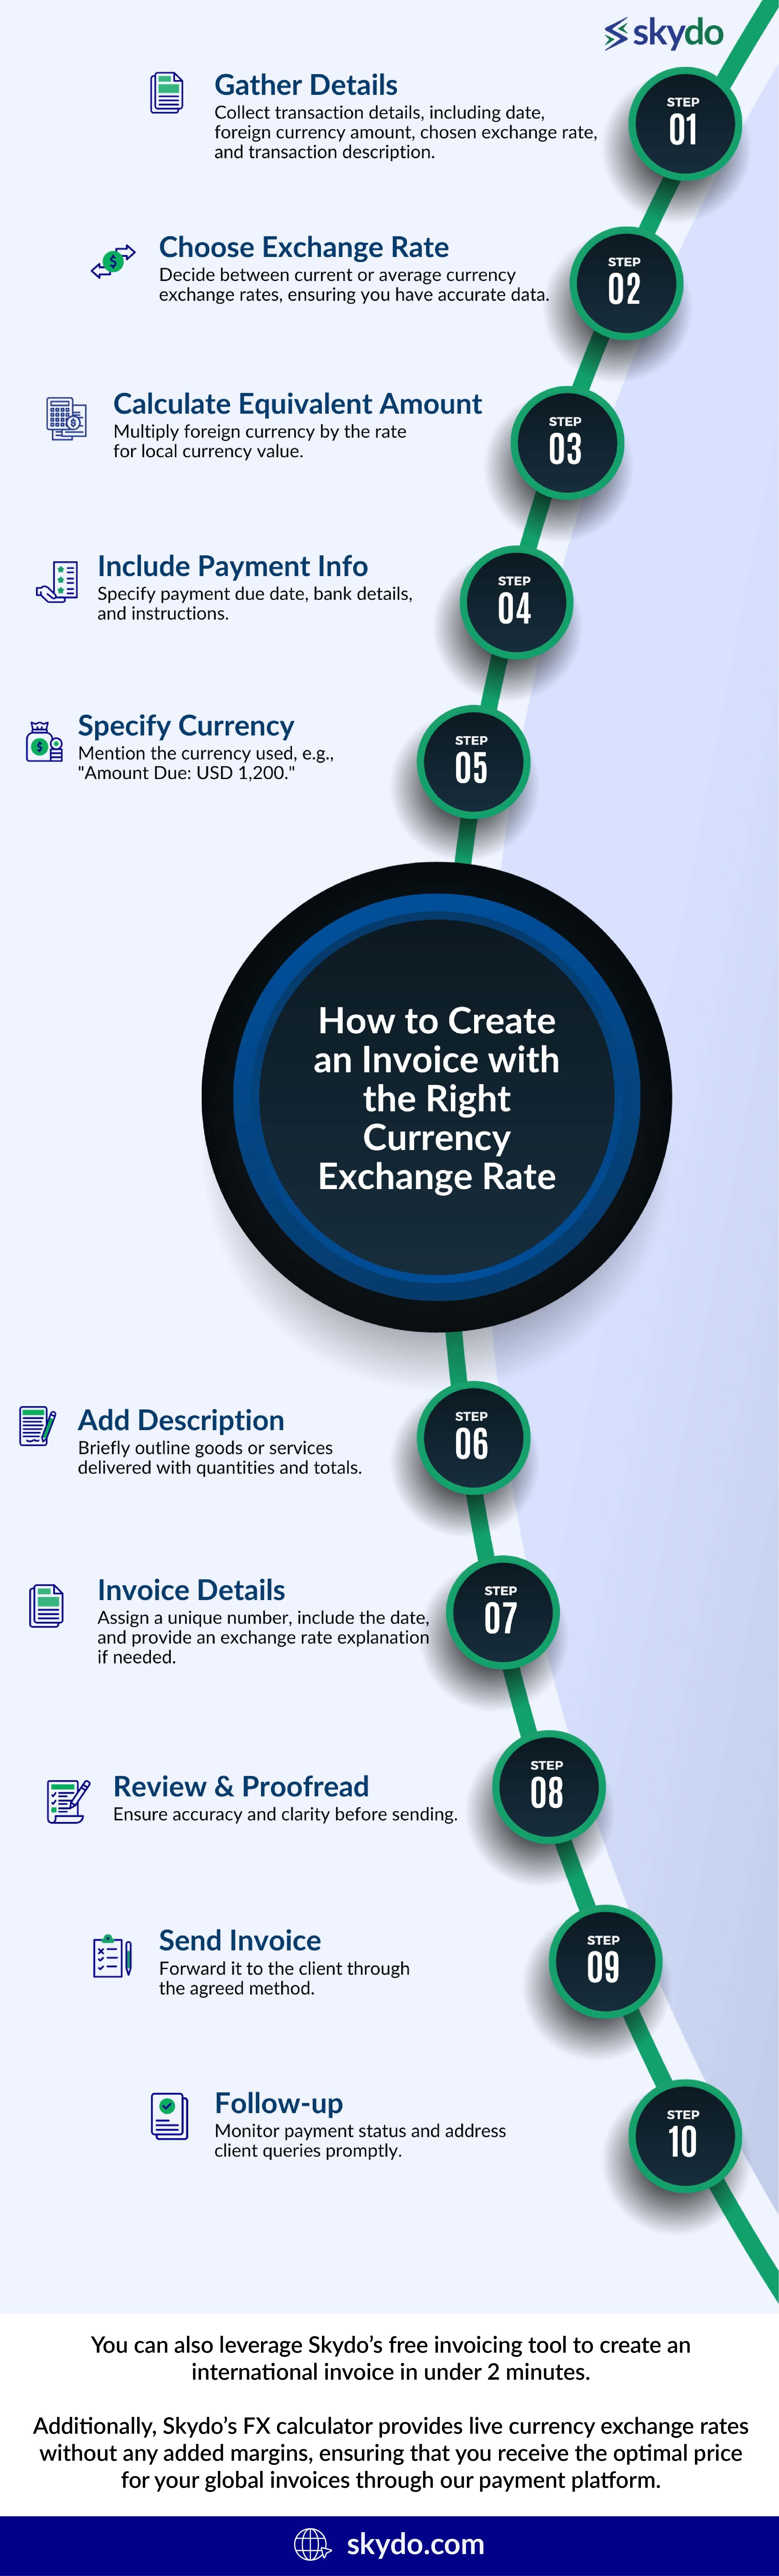 How to Mitigate Currency Exchange Rate Risk